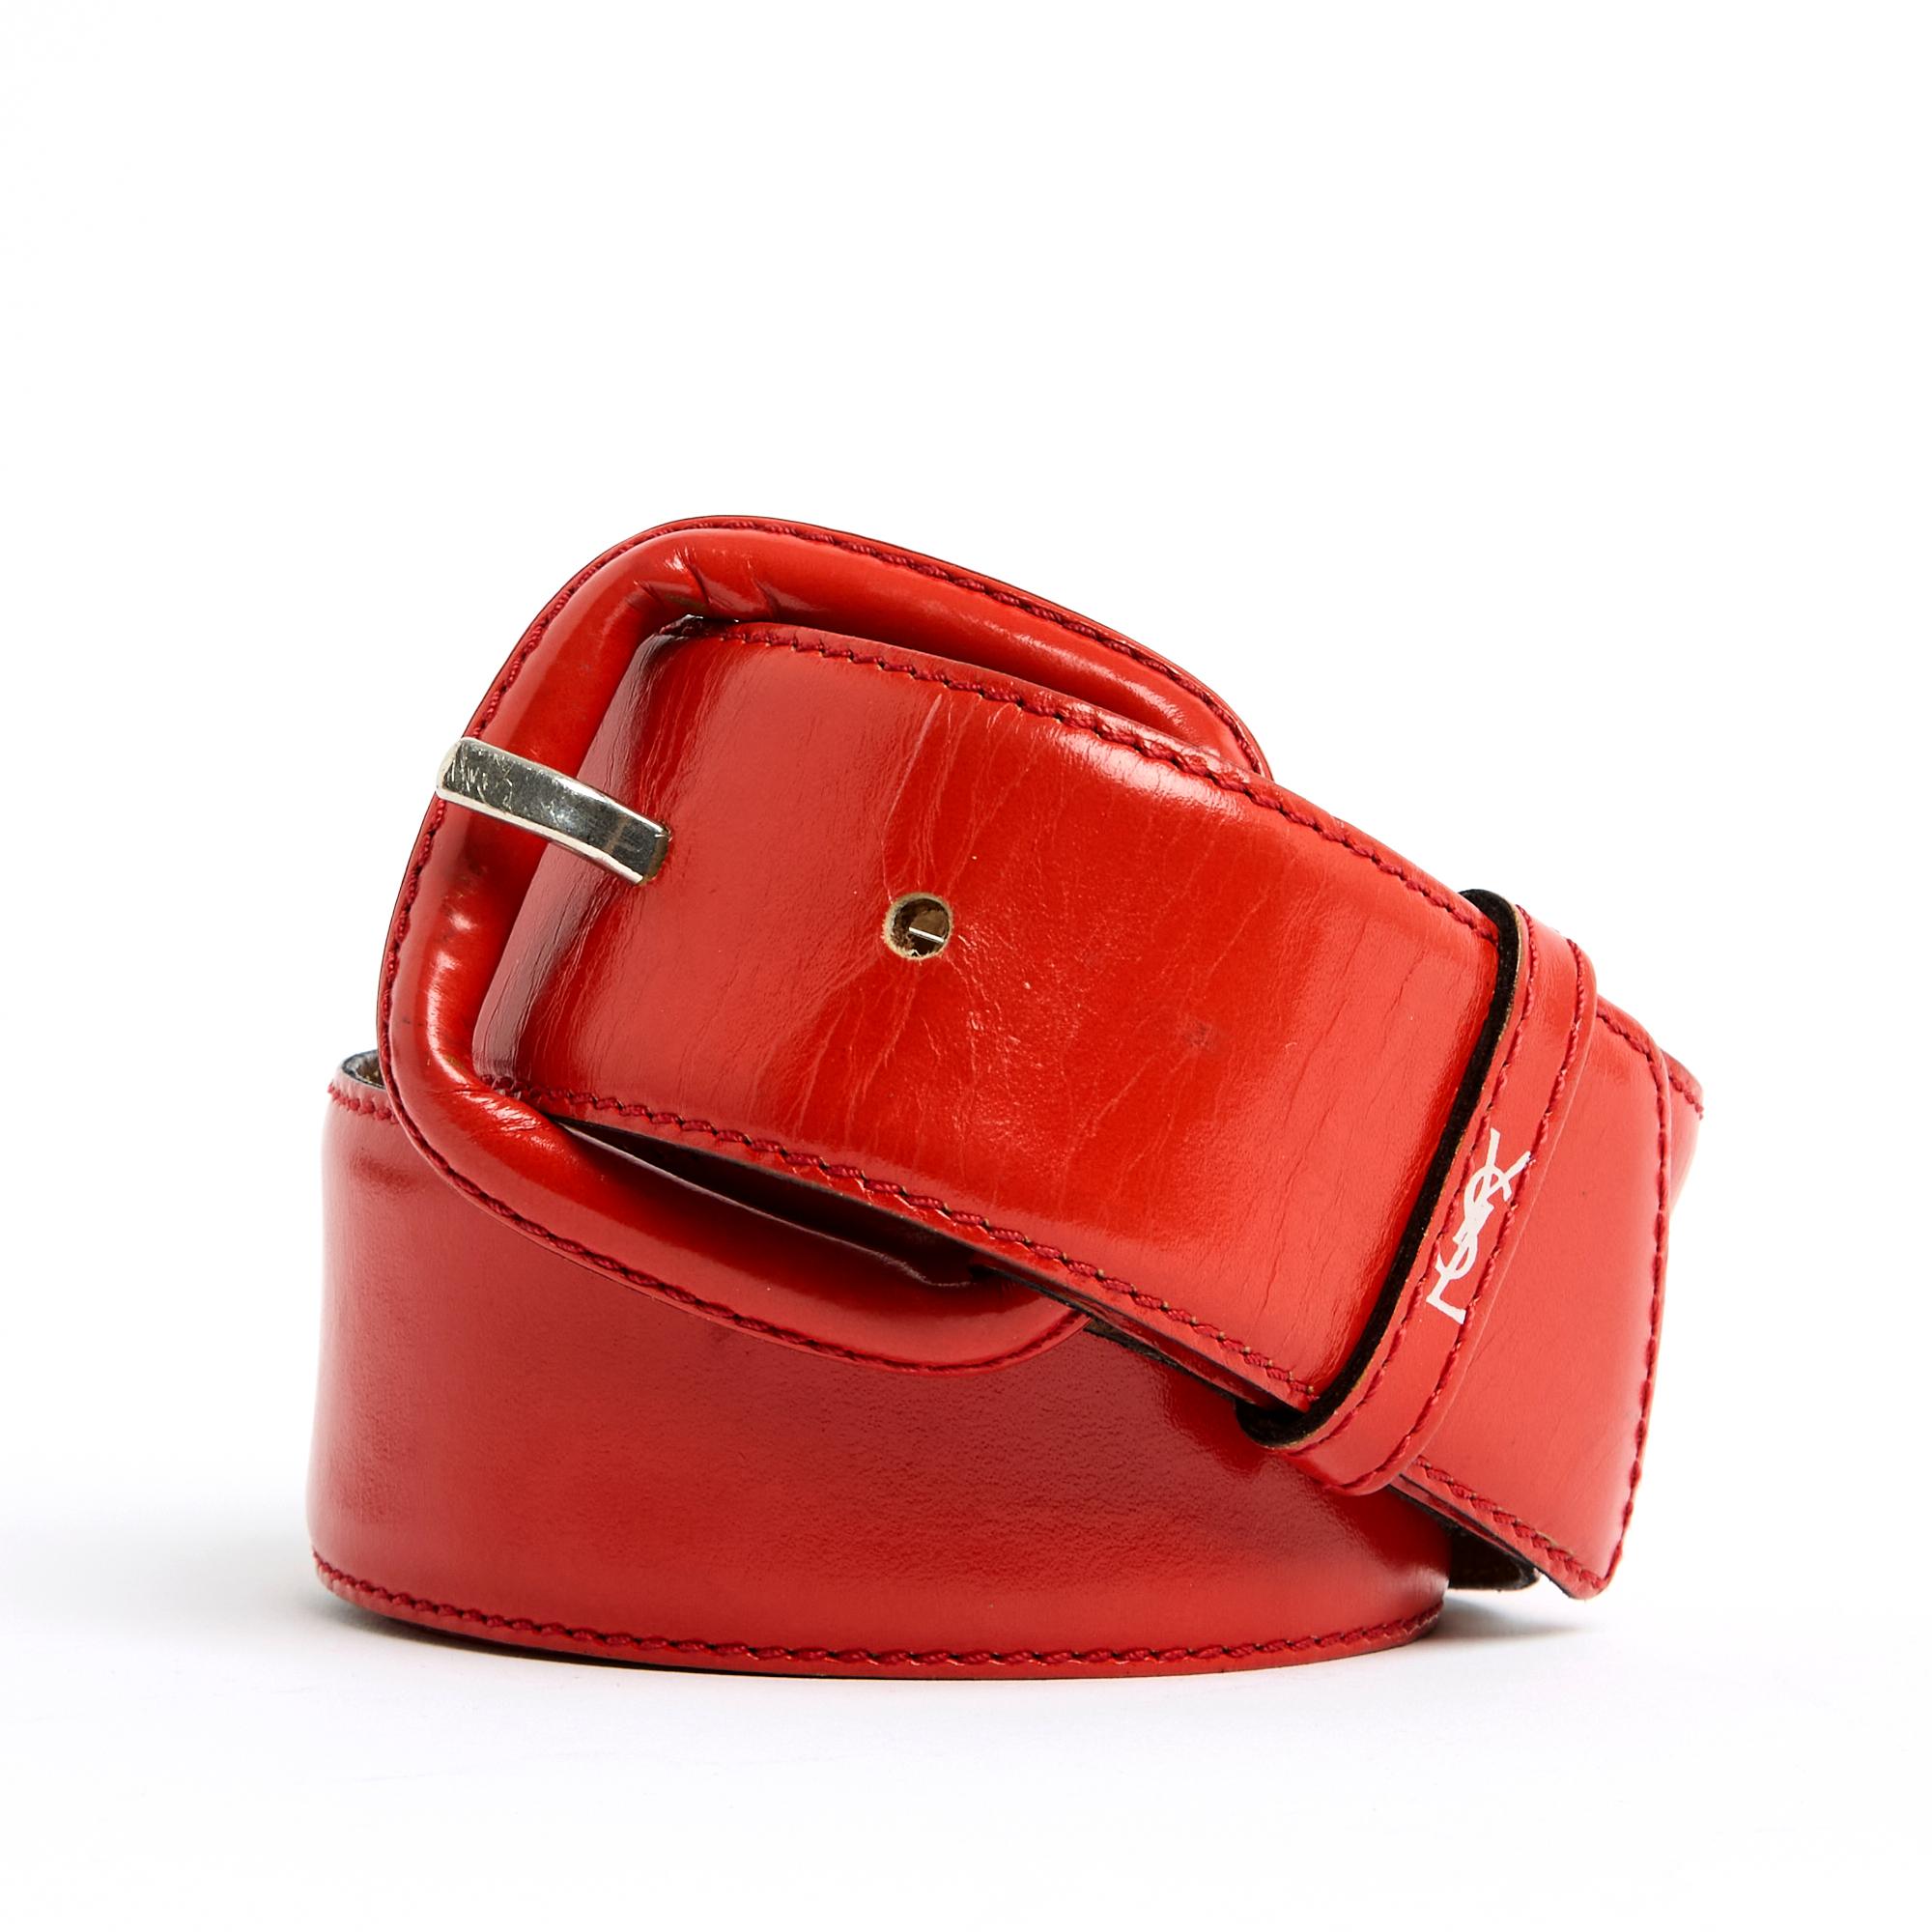 Yves Saint Laurent belt circa 1990 in smooth coral red leather, pin buckle covered in leather, YSL logo loop Size 70: total length of the belt 85 cm, 5-hole closure (all original) from 66 to 77 cm, width of the belt 3.8 cm, buckle dimensions 5.8 x